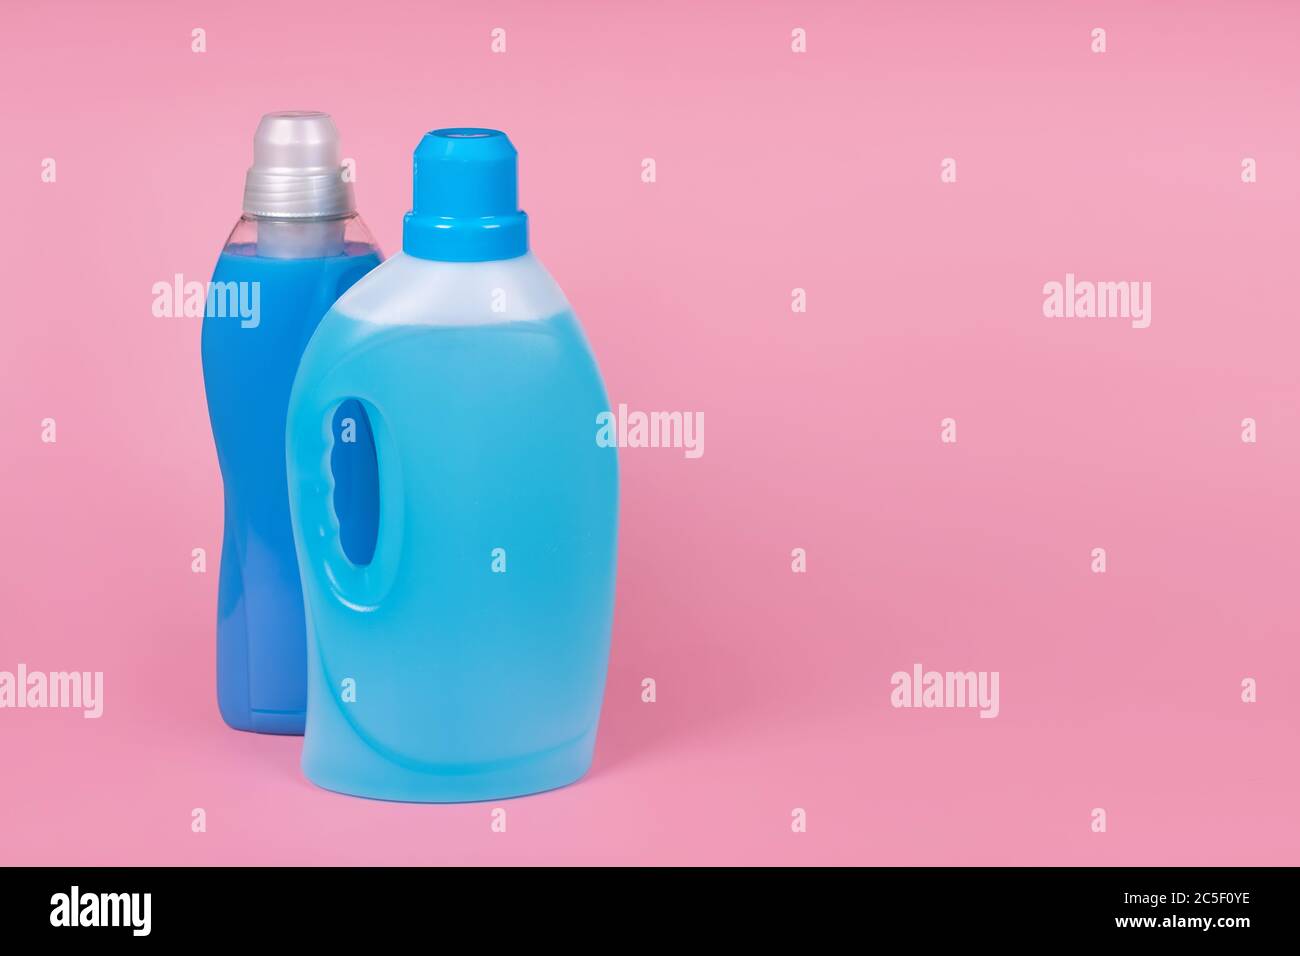 Bottles of detergent and fabric softener on pink background. Containers of cleaning products, household chemicals. Liquid laundry detergent and Stock Photo